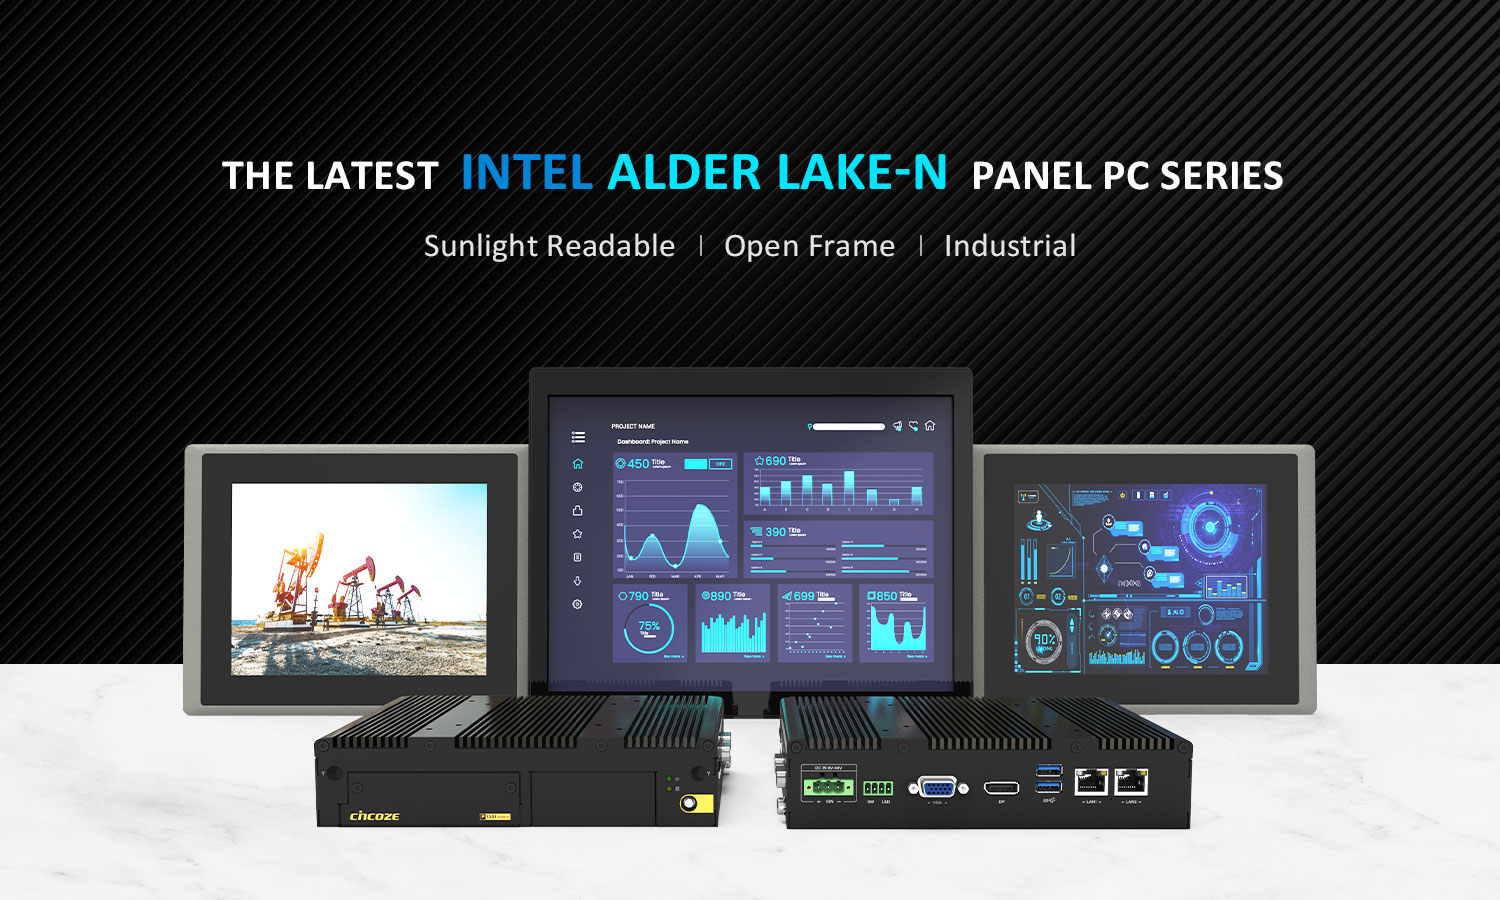 Cincoze P1301, The Latest INTEL Alder Lake-N Panel PC Series - industrial, sunlight readable and open frame